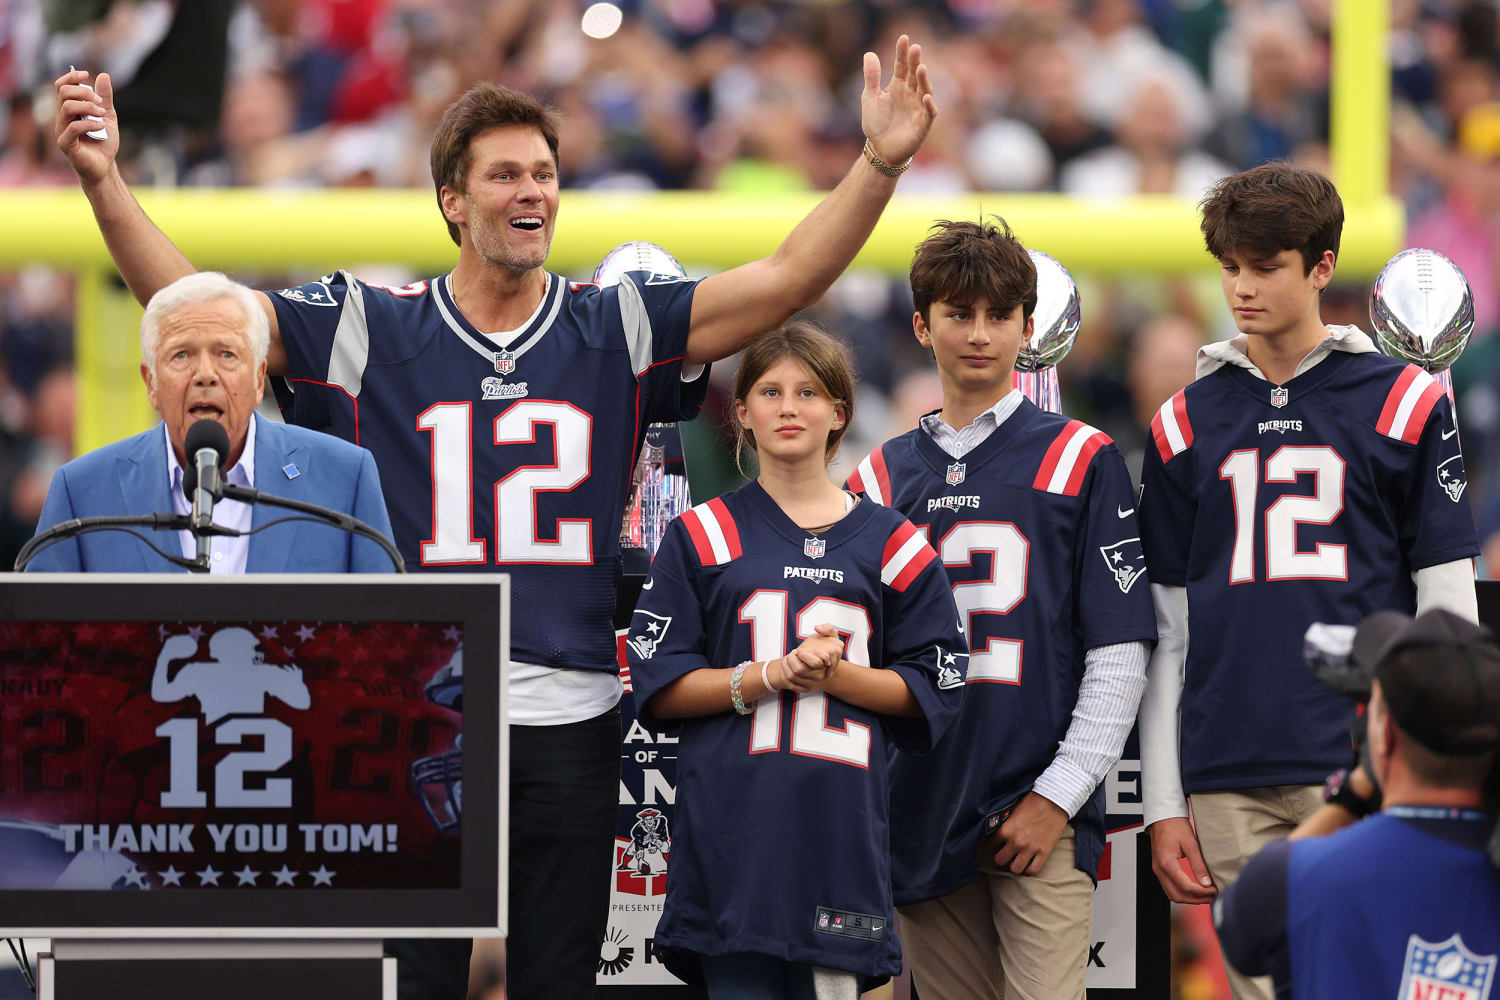 Tom Brady's Kids: What To Know About His 3 Children